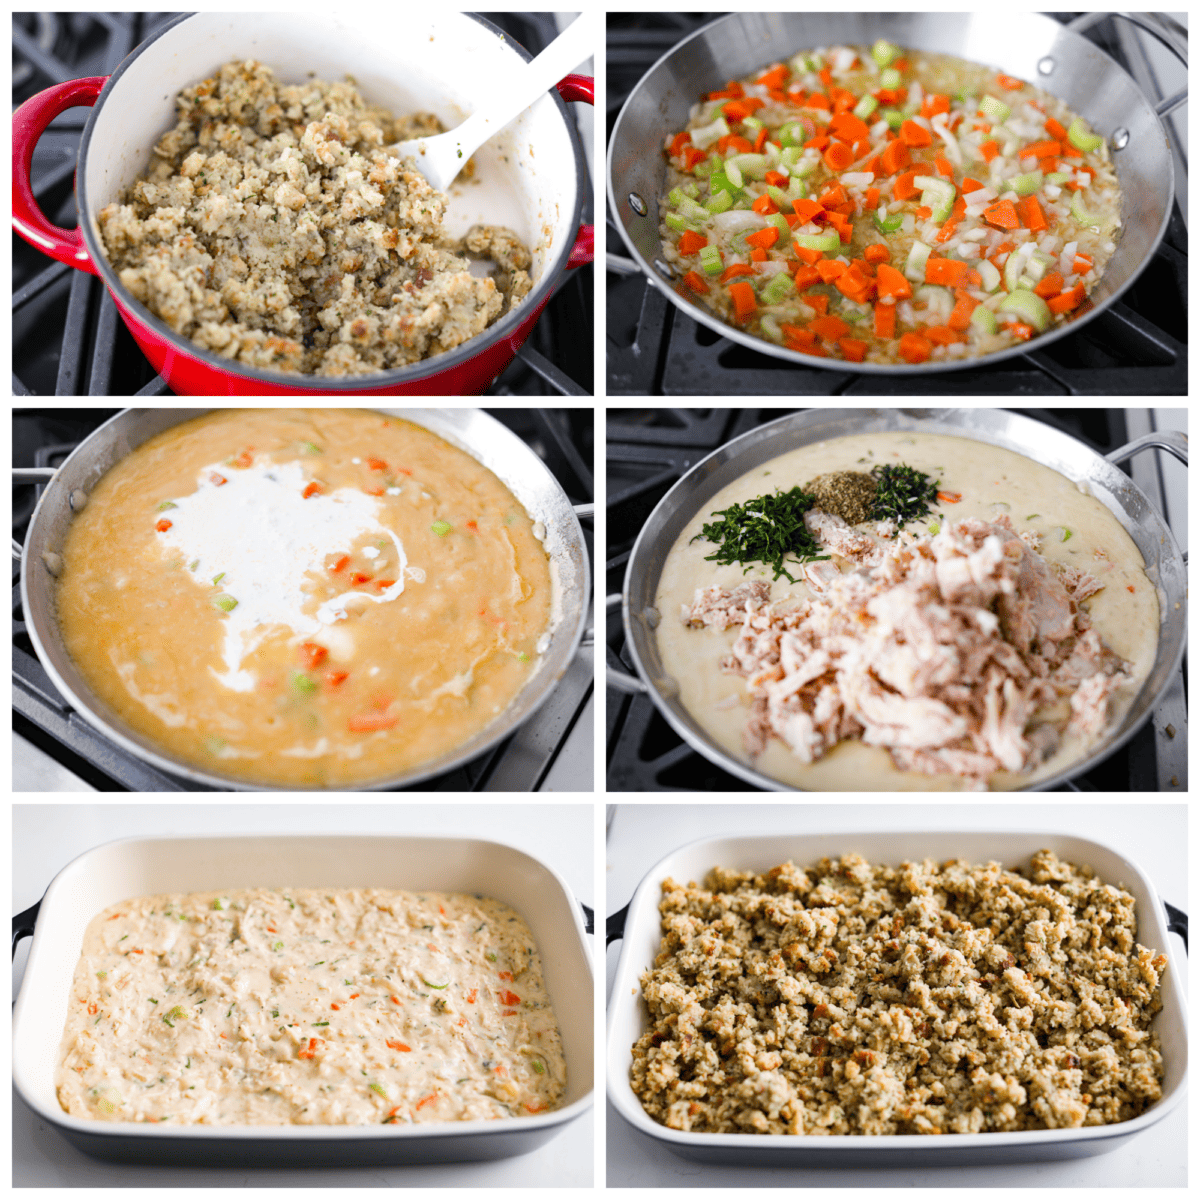 6-photo collage of the casserole being prepared by making the stuffing and creamy sauce.